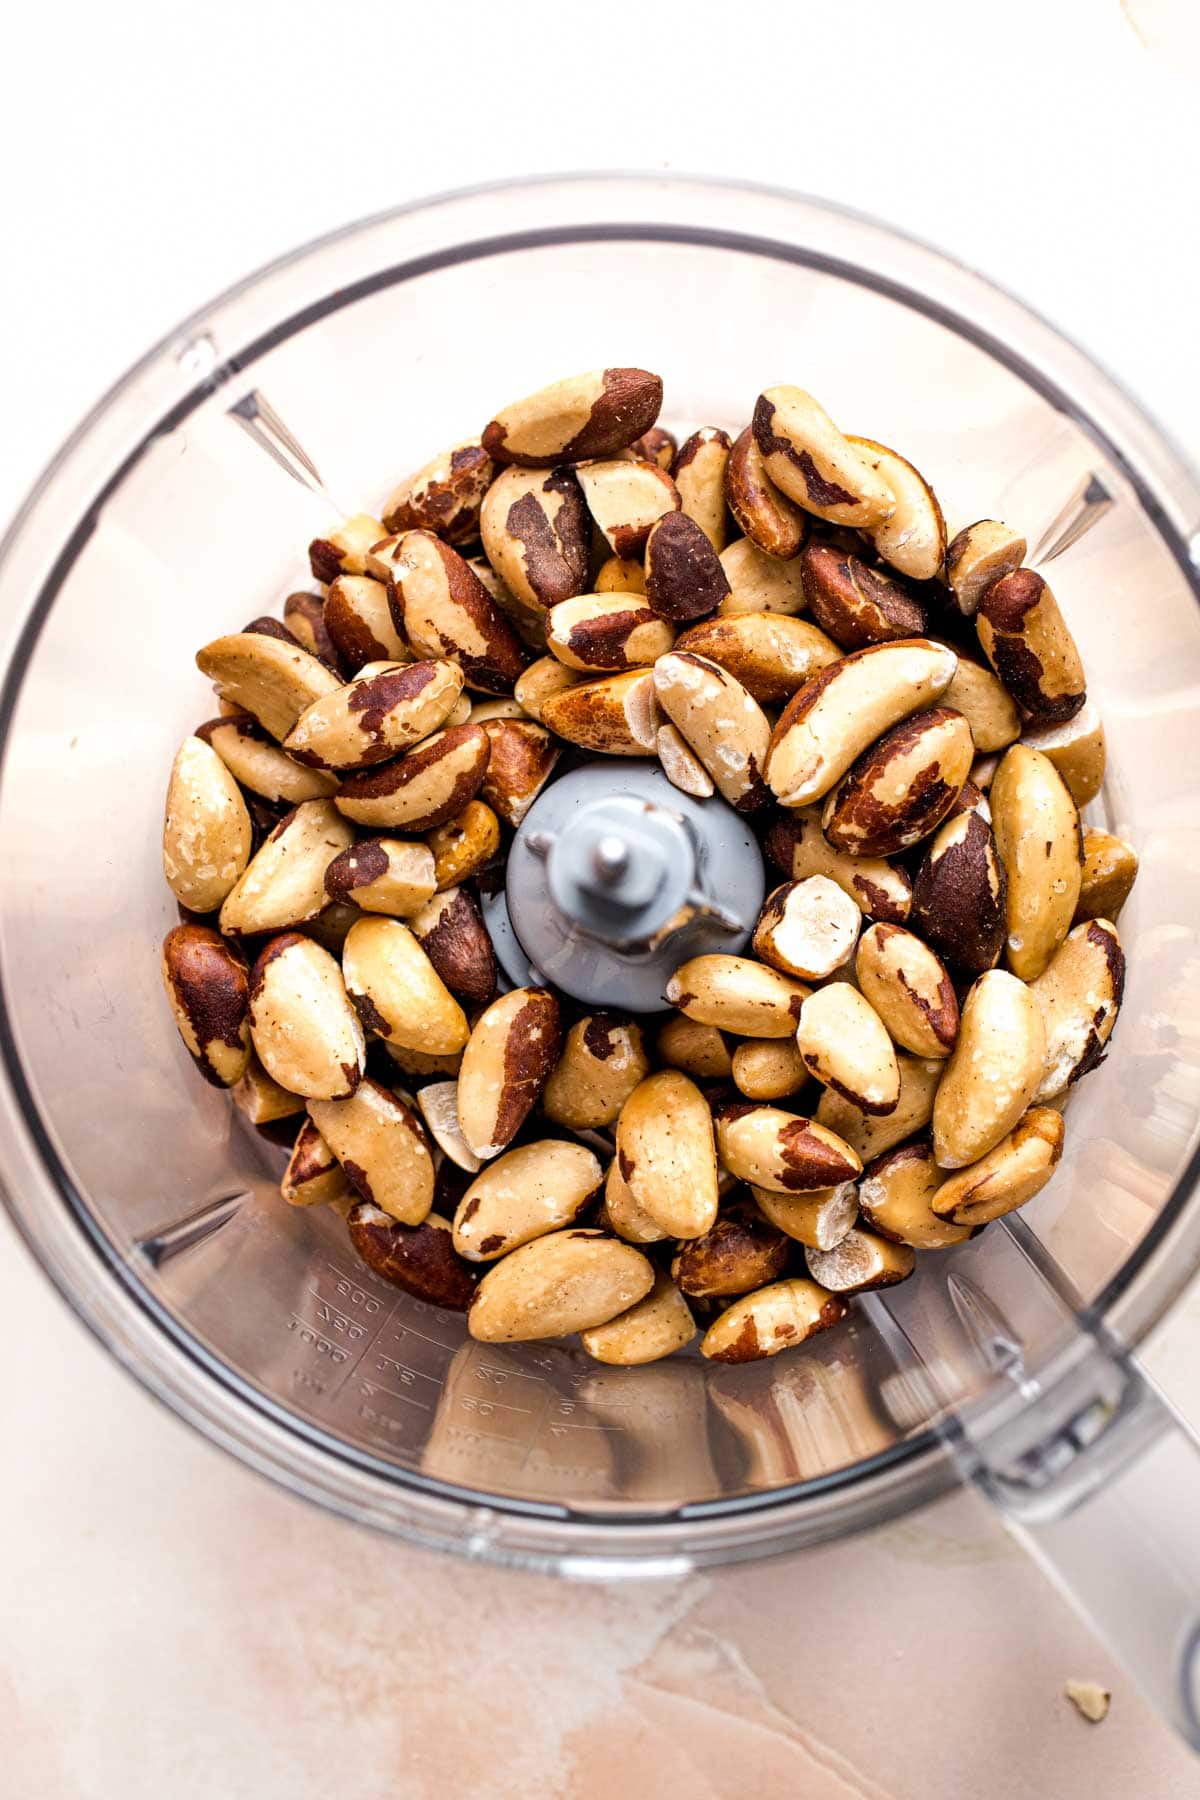 Roasted Brazil nuts in a food processor.